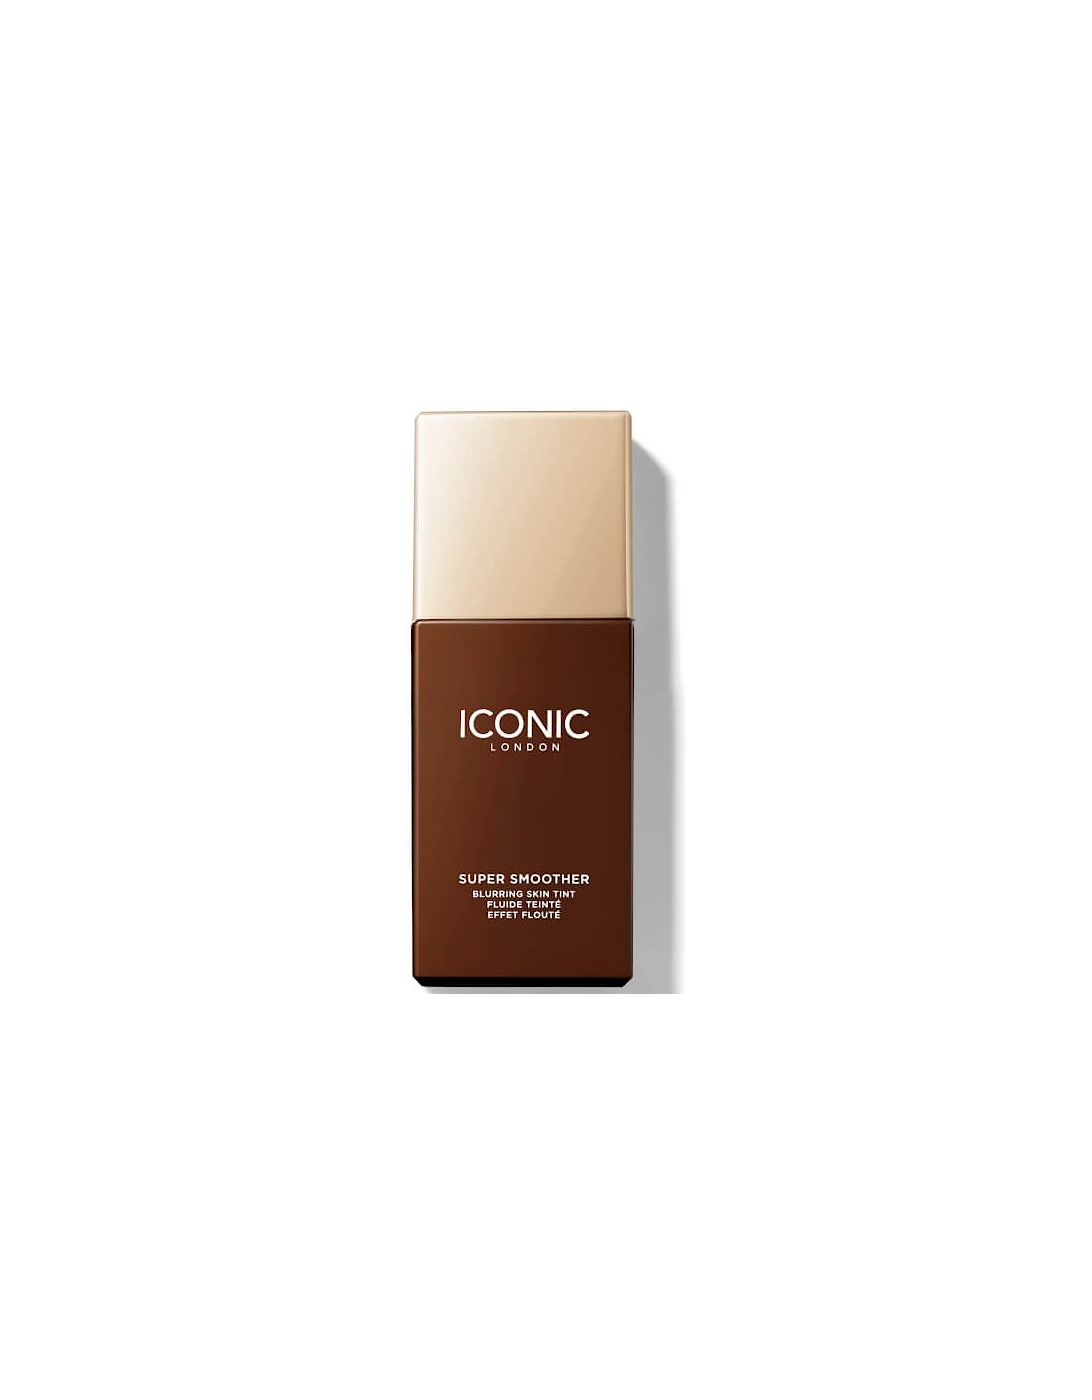 Super Smoother Blurring Skin Tint - Warm Rich, 2 of 1